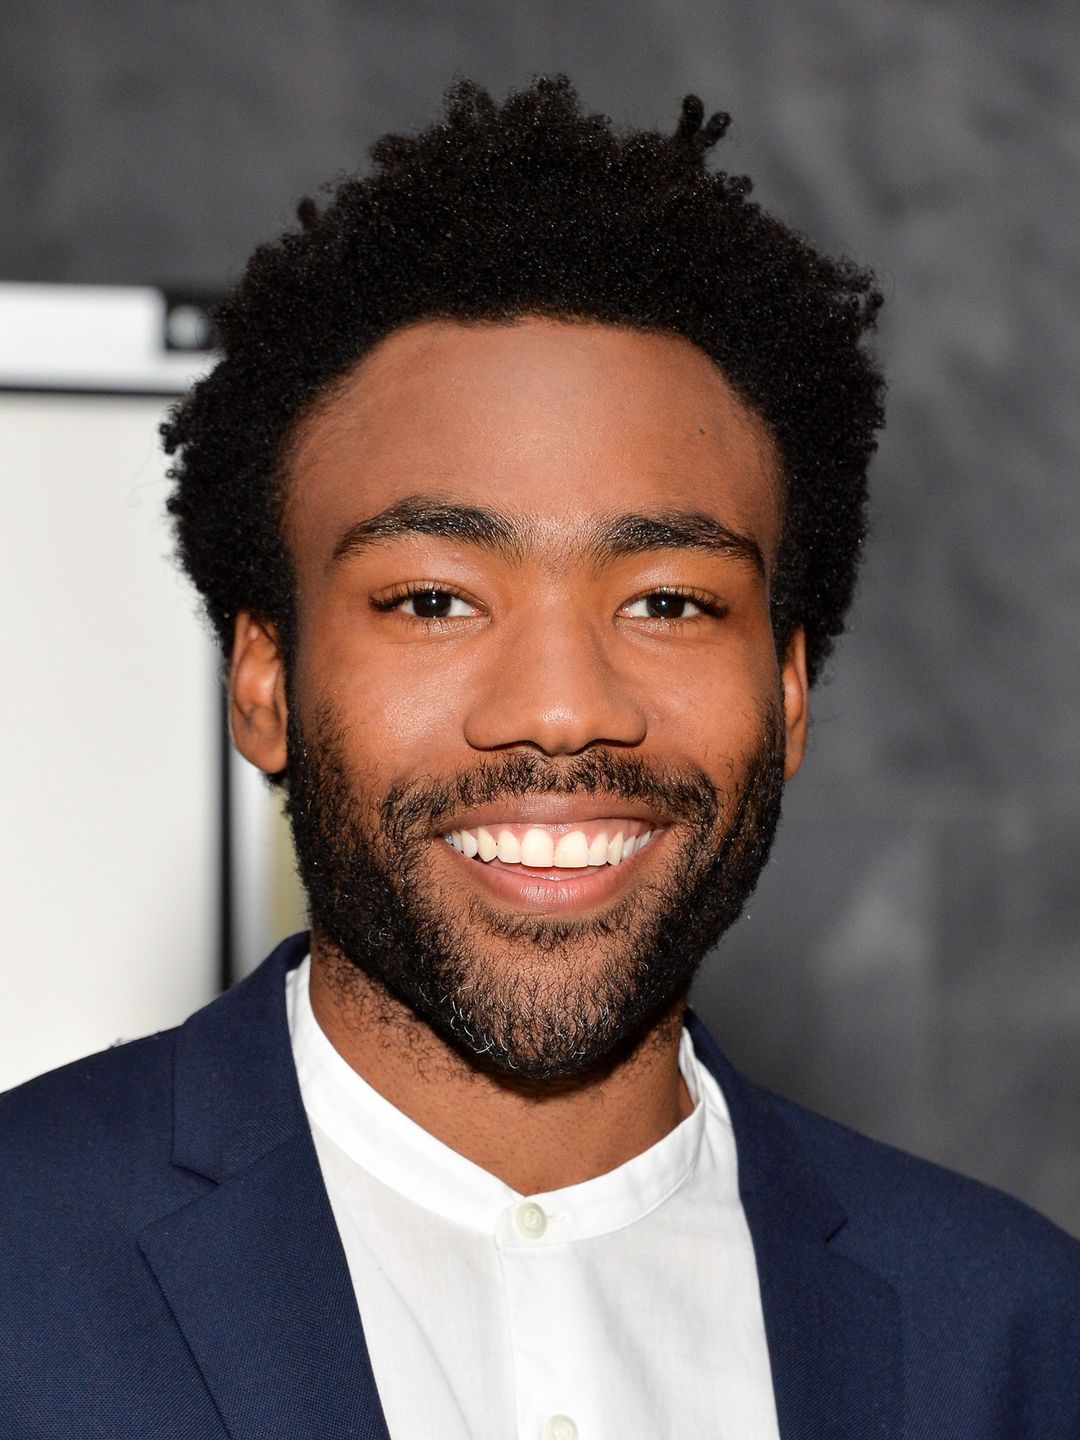 Donald Glover does he have a wife